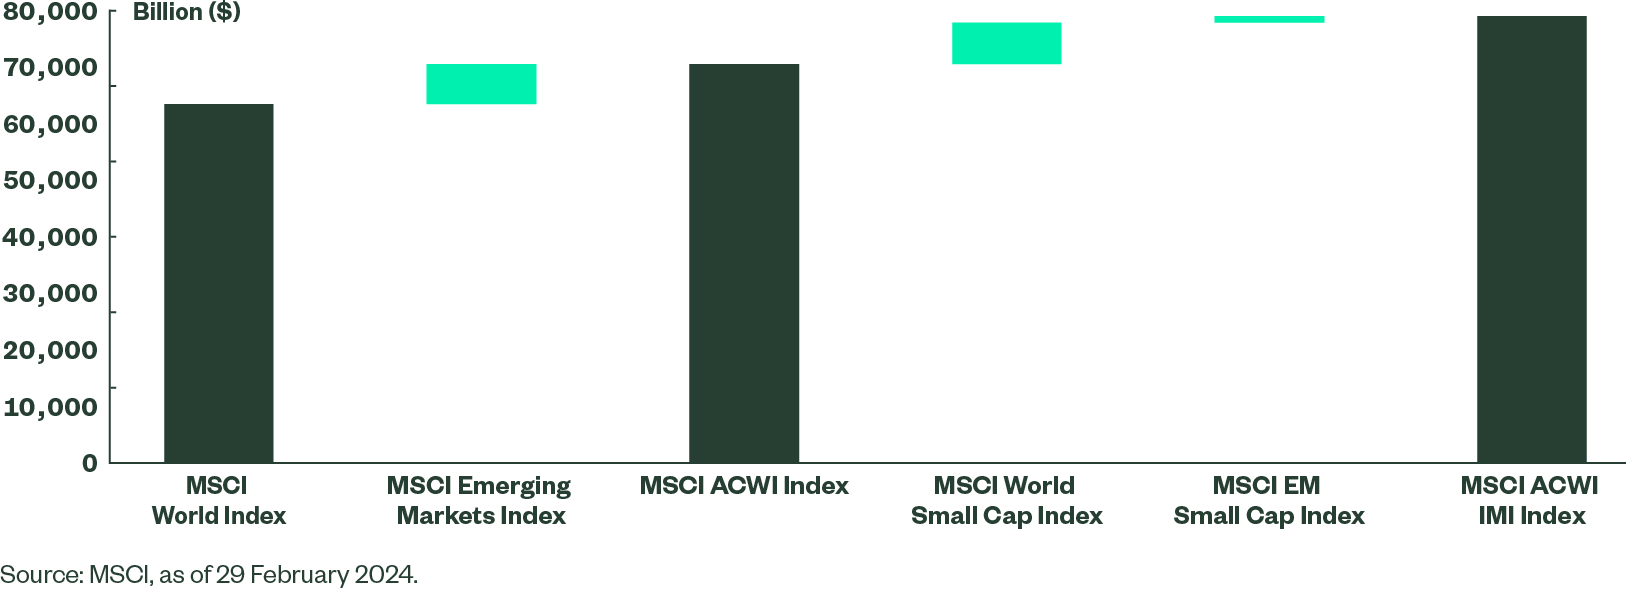 Global Equity Indices By Market Cap